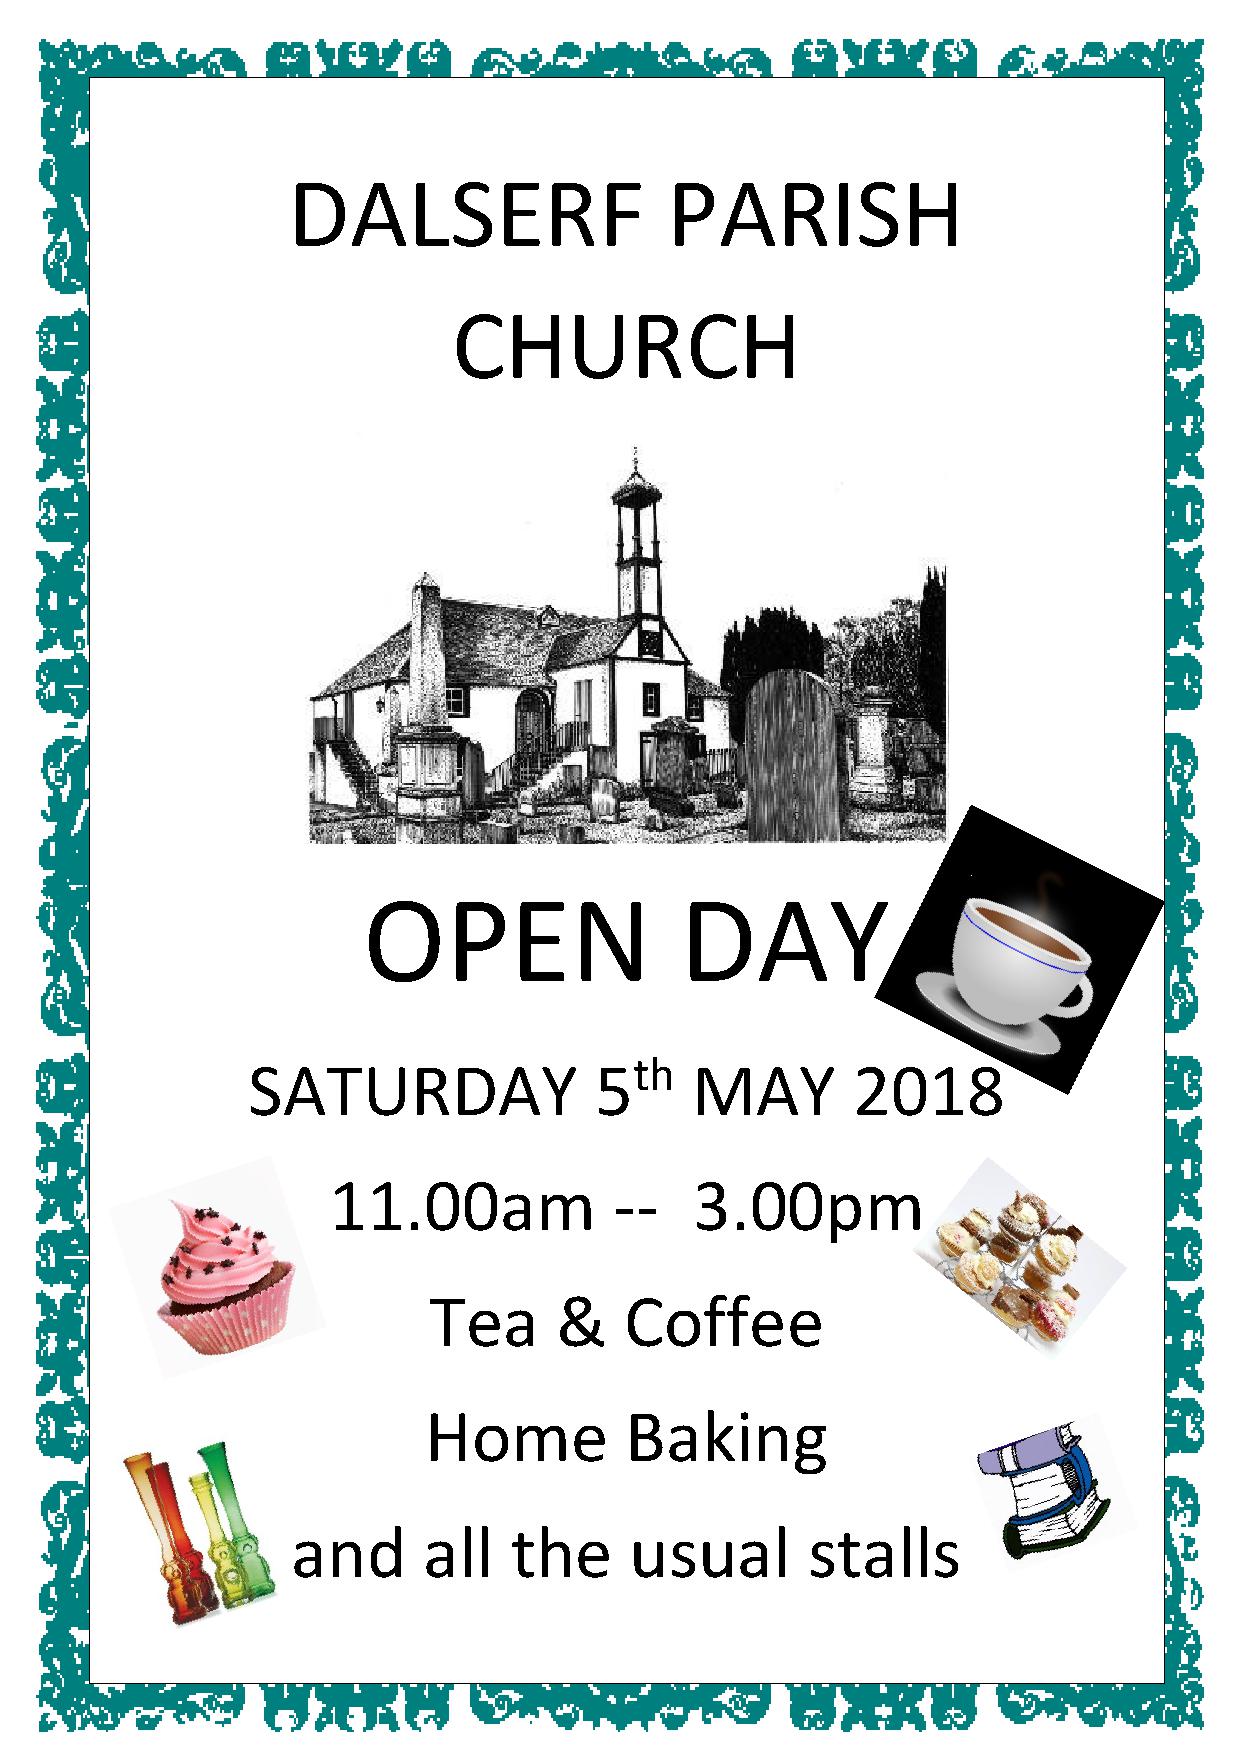 OPEN DAY POSTER 2018 1